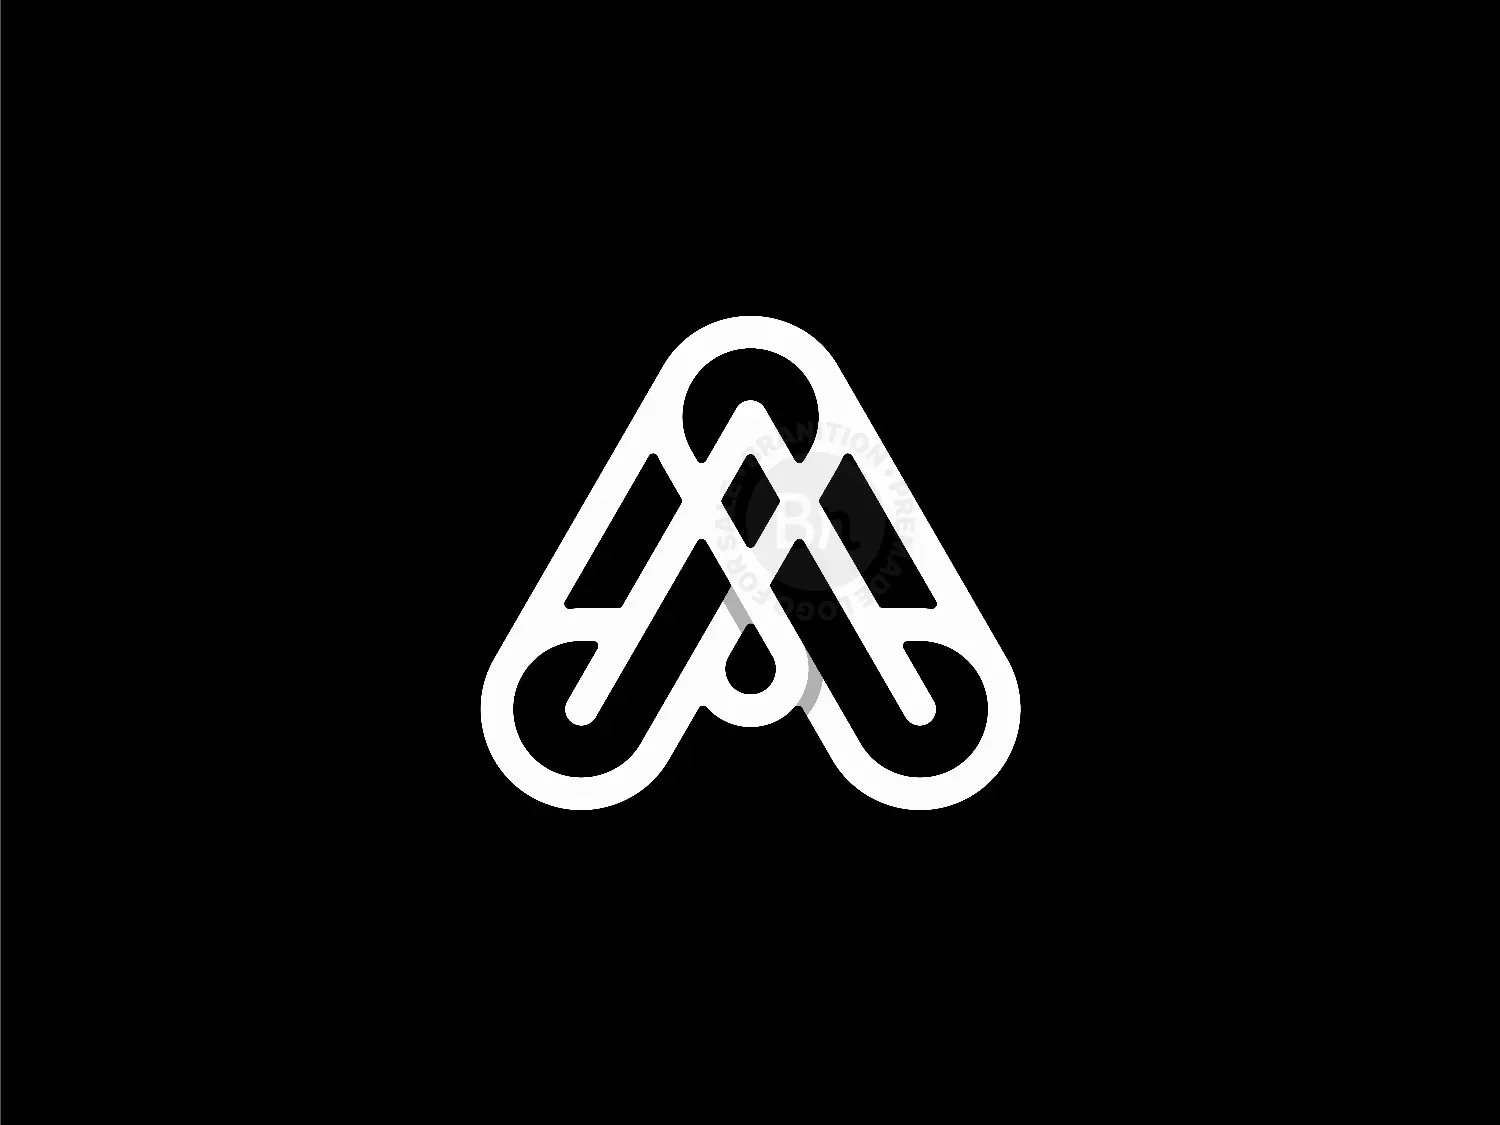 Letter A Infinity Logo